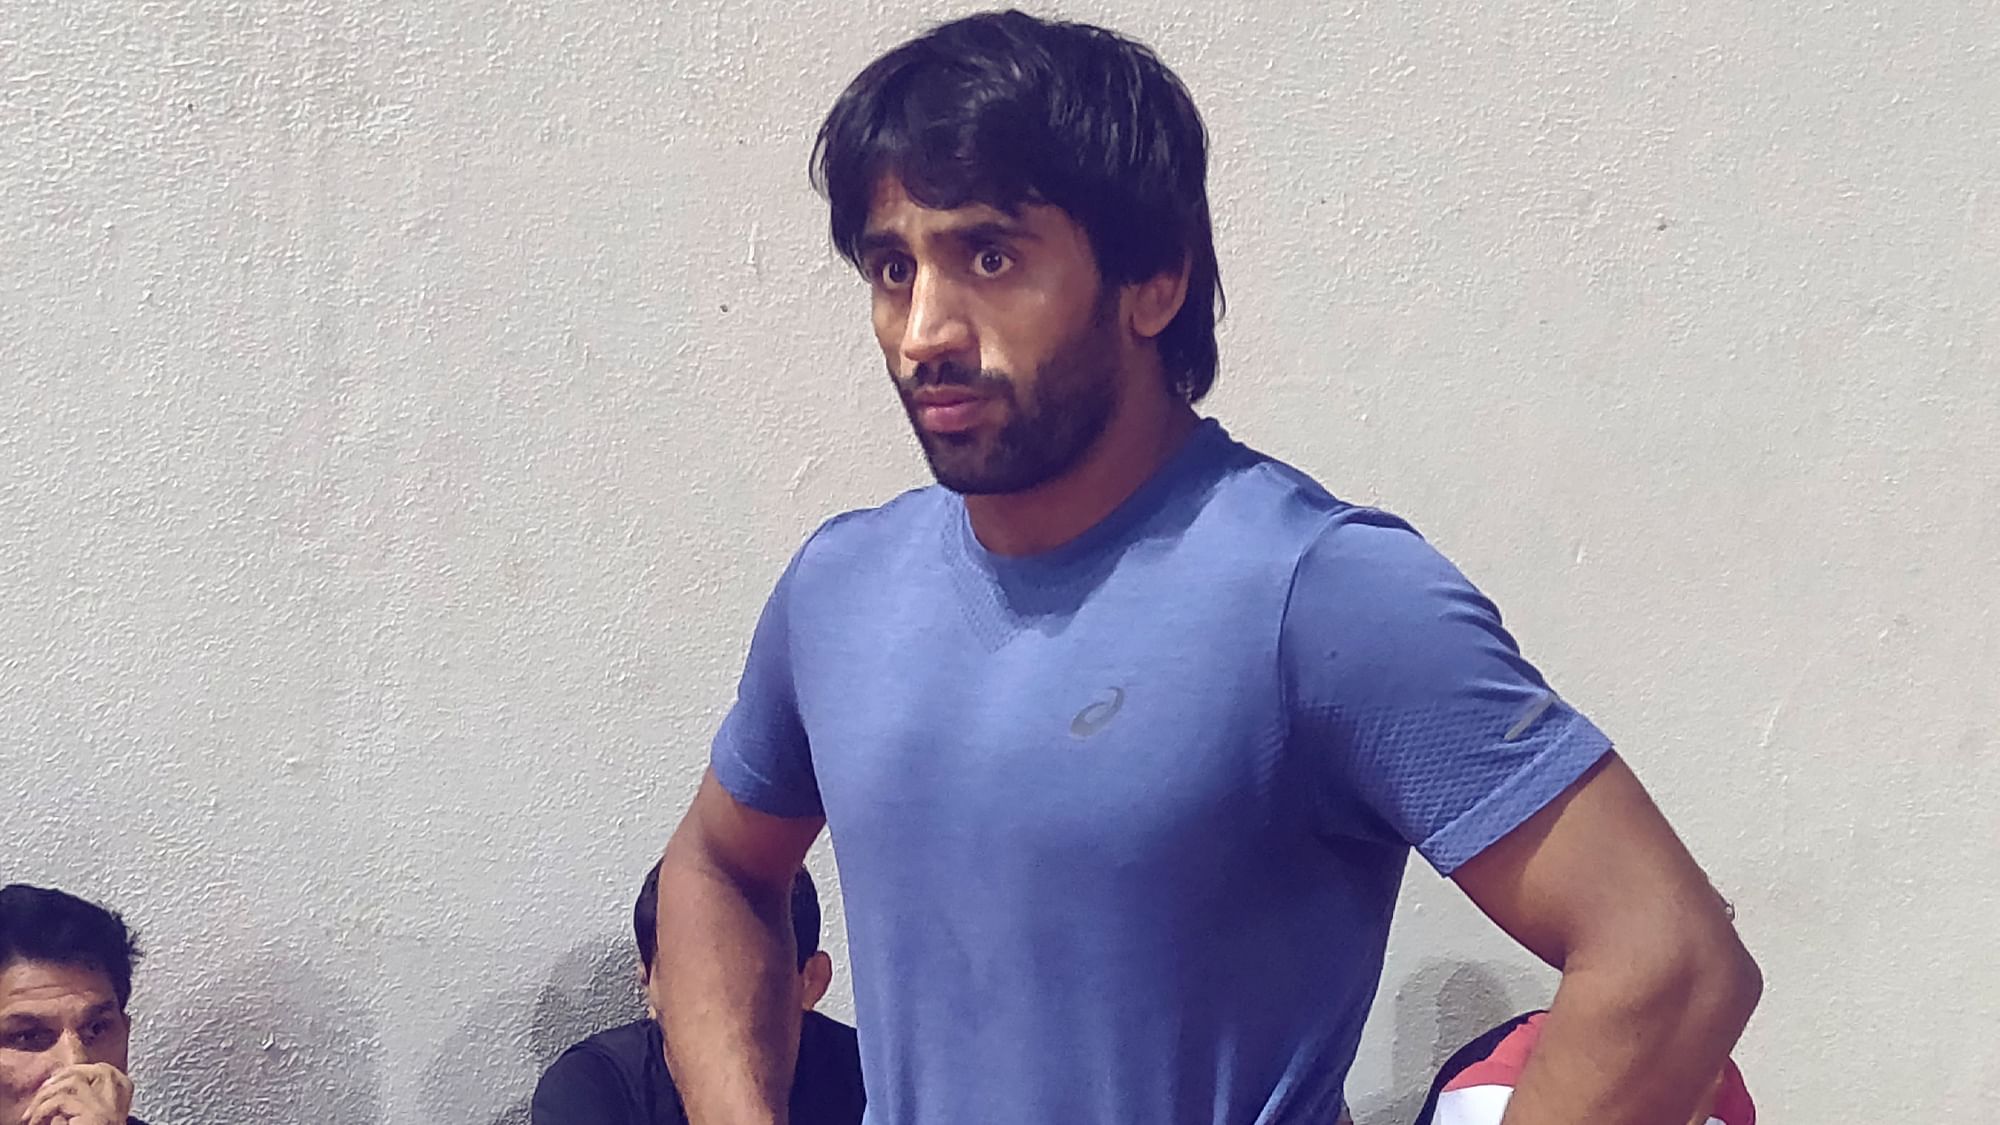 Bajrang Punia qualified for the World Wrestling Championships 2019 after he won  the 65kg weight class at the national trials on Friday, 26 July.